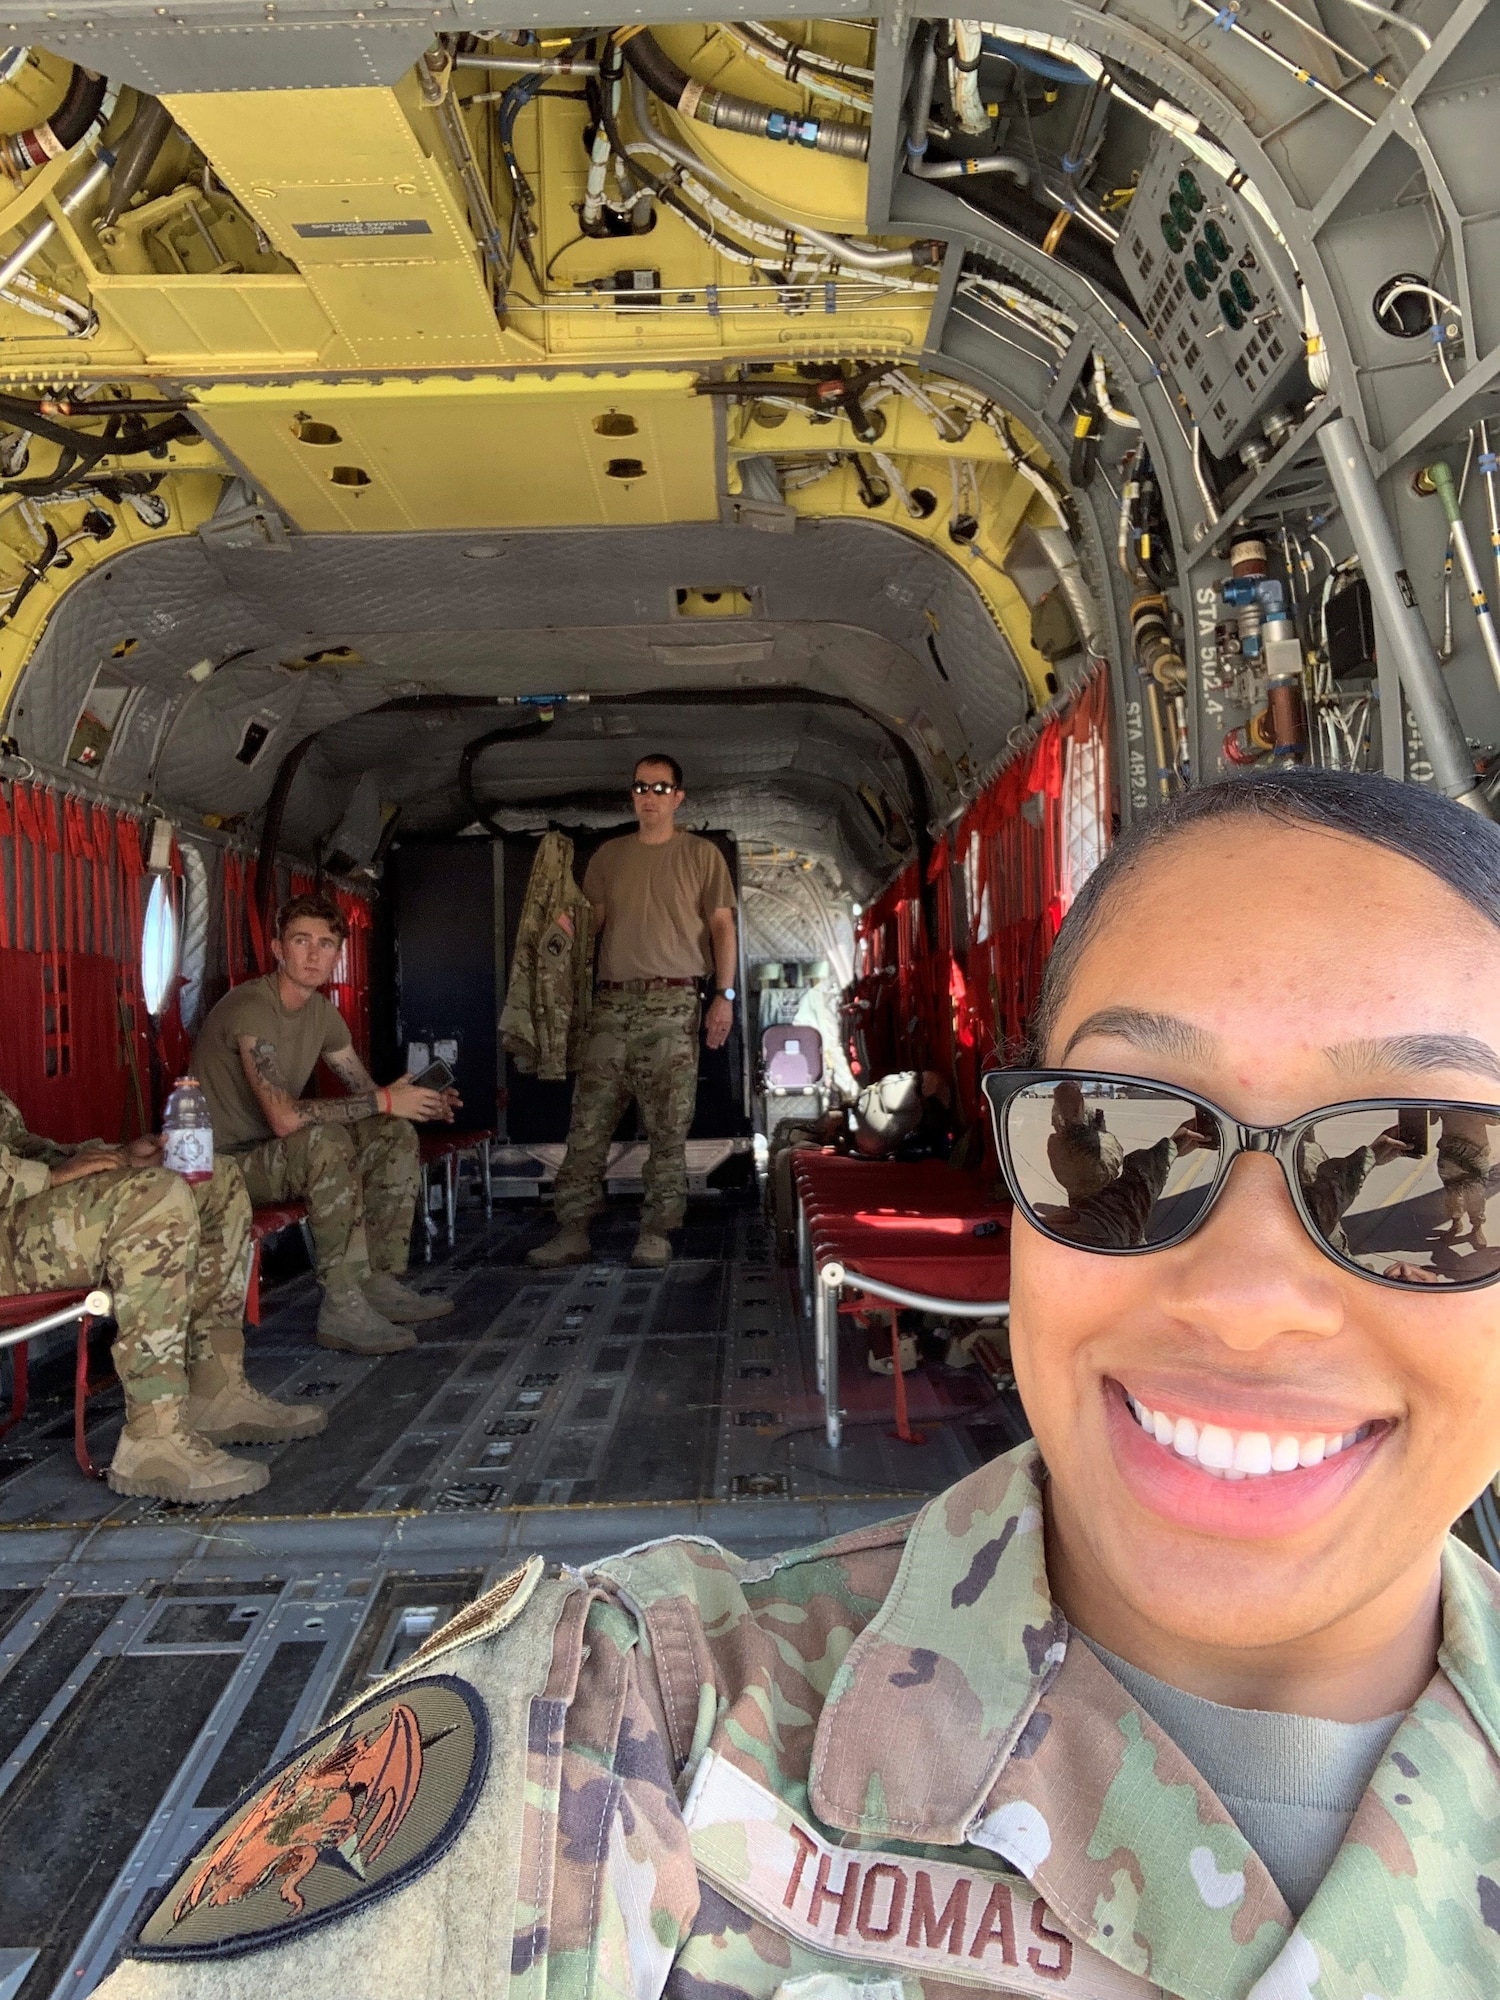 Tech Sgt. Bionca Thomas, Detachment 2 of the 9th Operations Group, takes a photo in a CH-47 helicopter during a recent training exercise. Thomas recently achieved the rare milestone of achieving her Ph.D. Within the Air Force Enlisted Force, just 0.0377% possess professional or doctorate degrees.